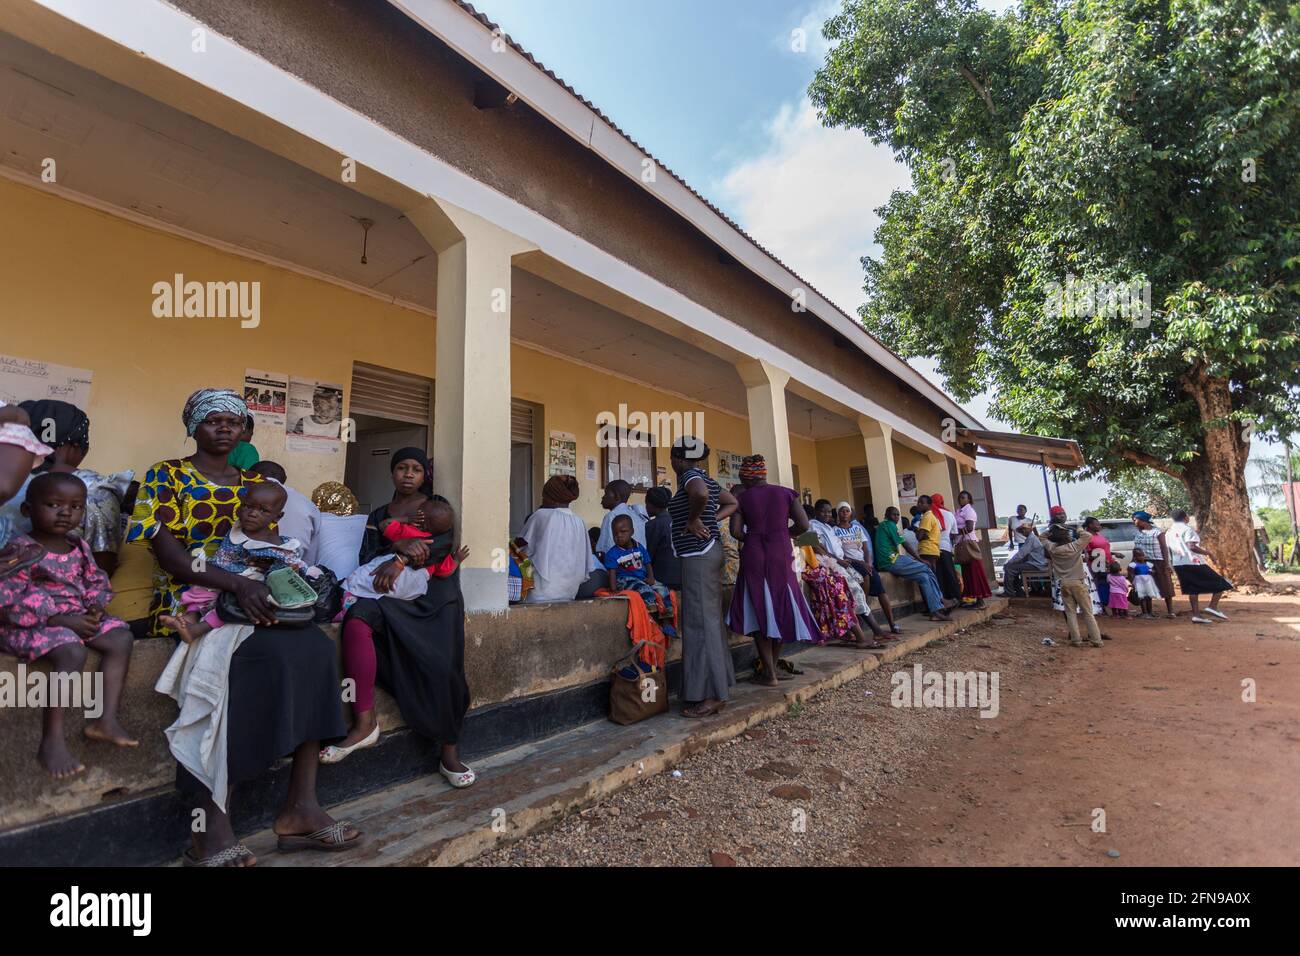 Patients are waiting outside of a medical clinic in Mbale, rural Eastern Uganda Stock Photo